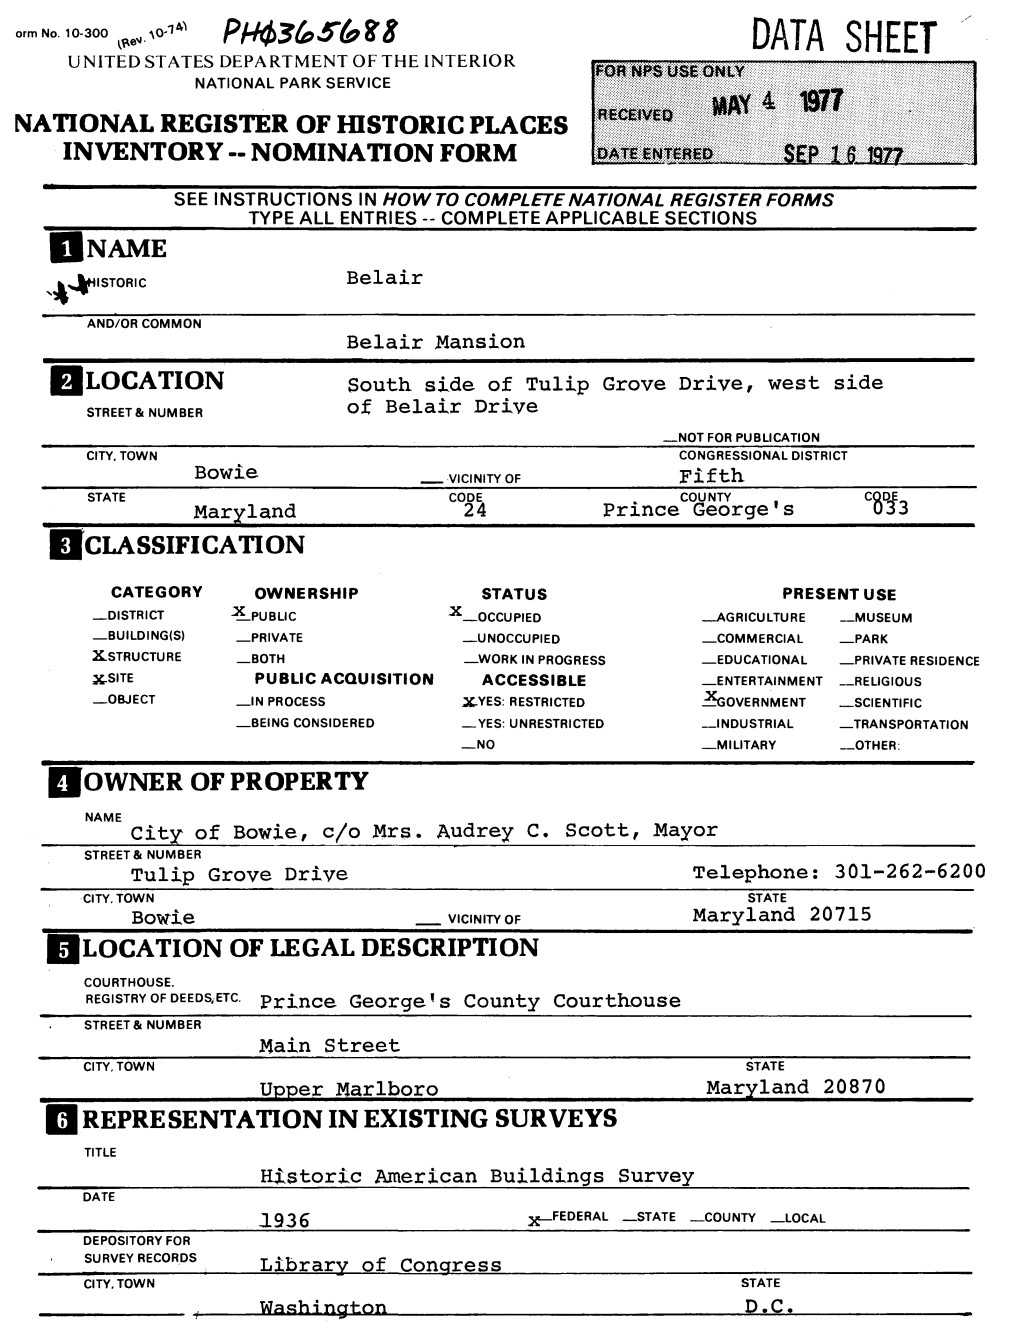 Data Sheet States Department of the Interior National Park Service National Register of Historic Places Inventory -- Nomination Form